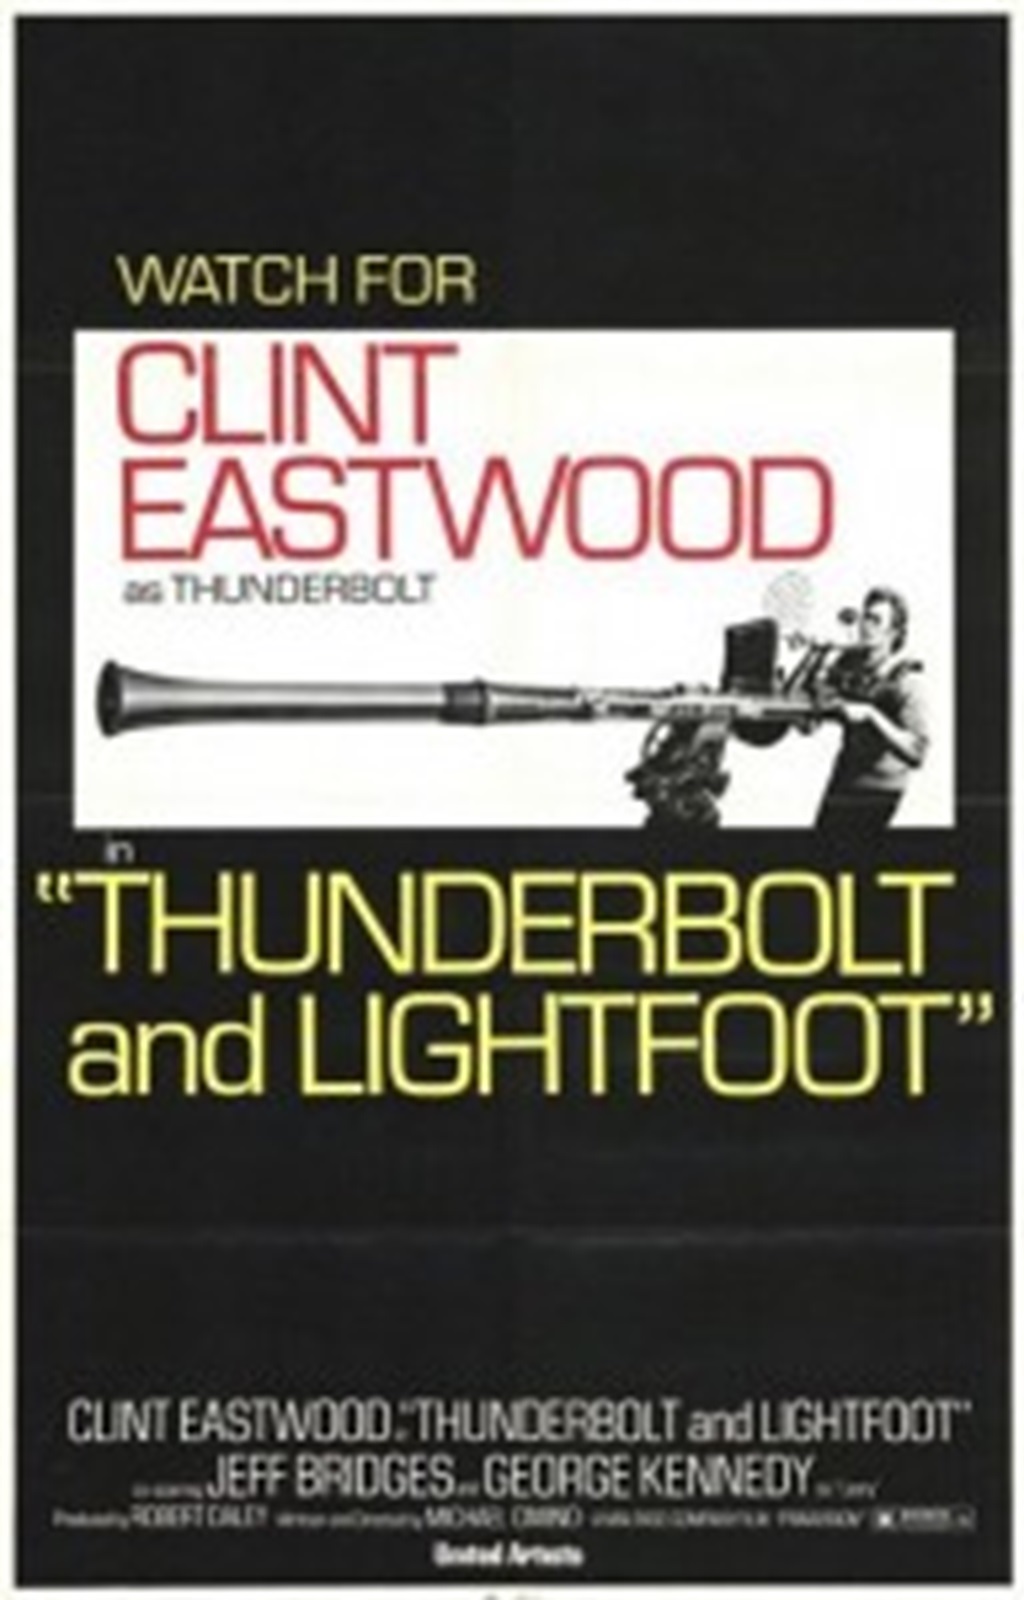 Blu-ray Review: “Thunderbolt and Lightfoot” (1974)